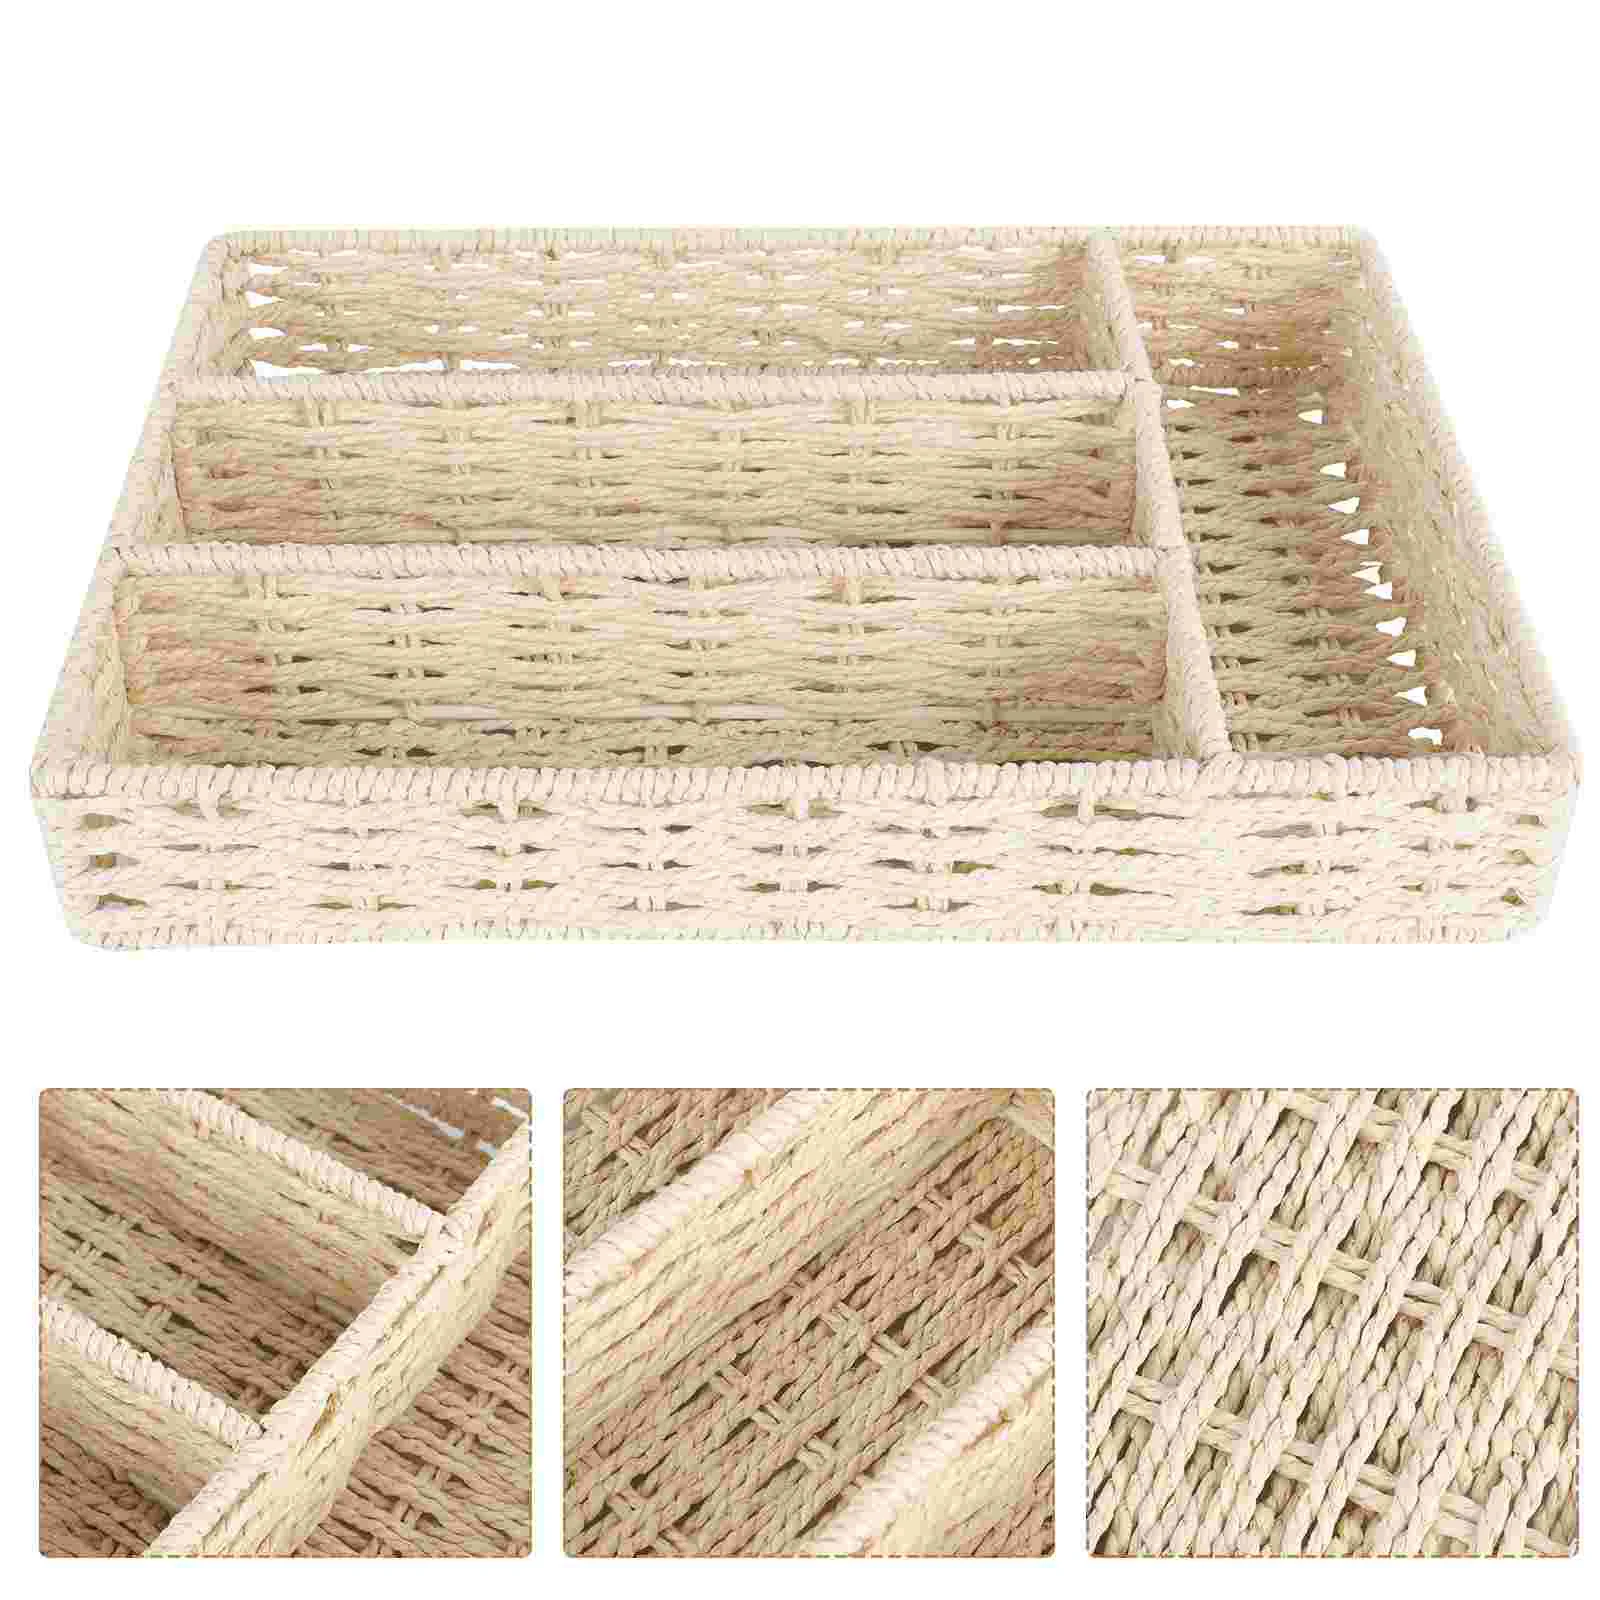 

Basket Organizer Storage Box Woven Desk Baskets Wicker Tabletea Sundries Tray Mail Straw Drawer Small Seagrass Rattan Containers